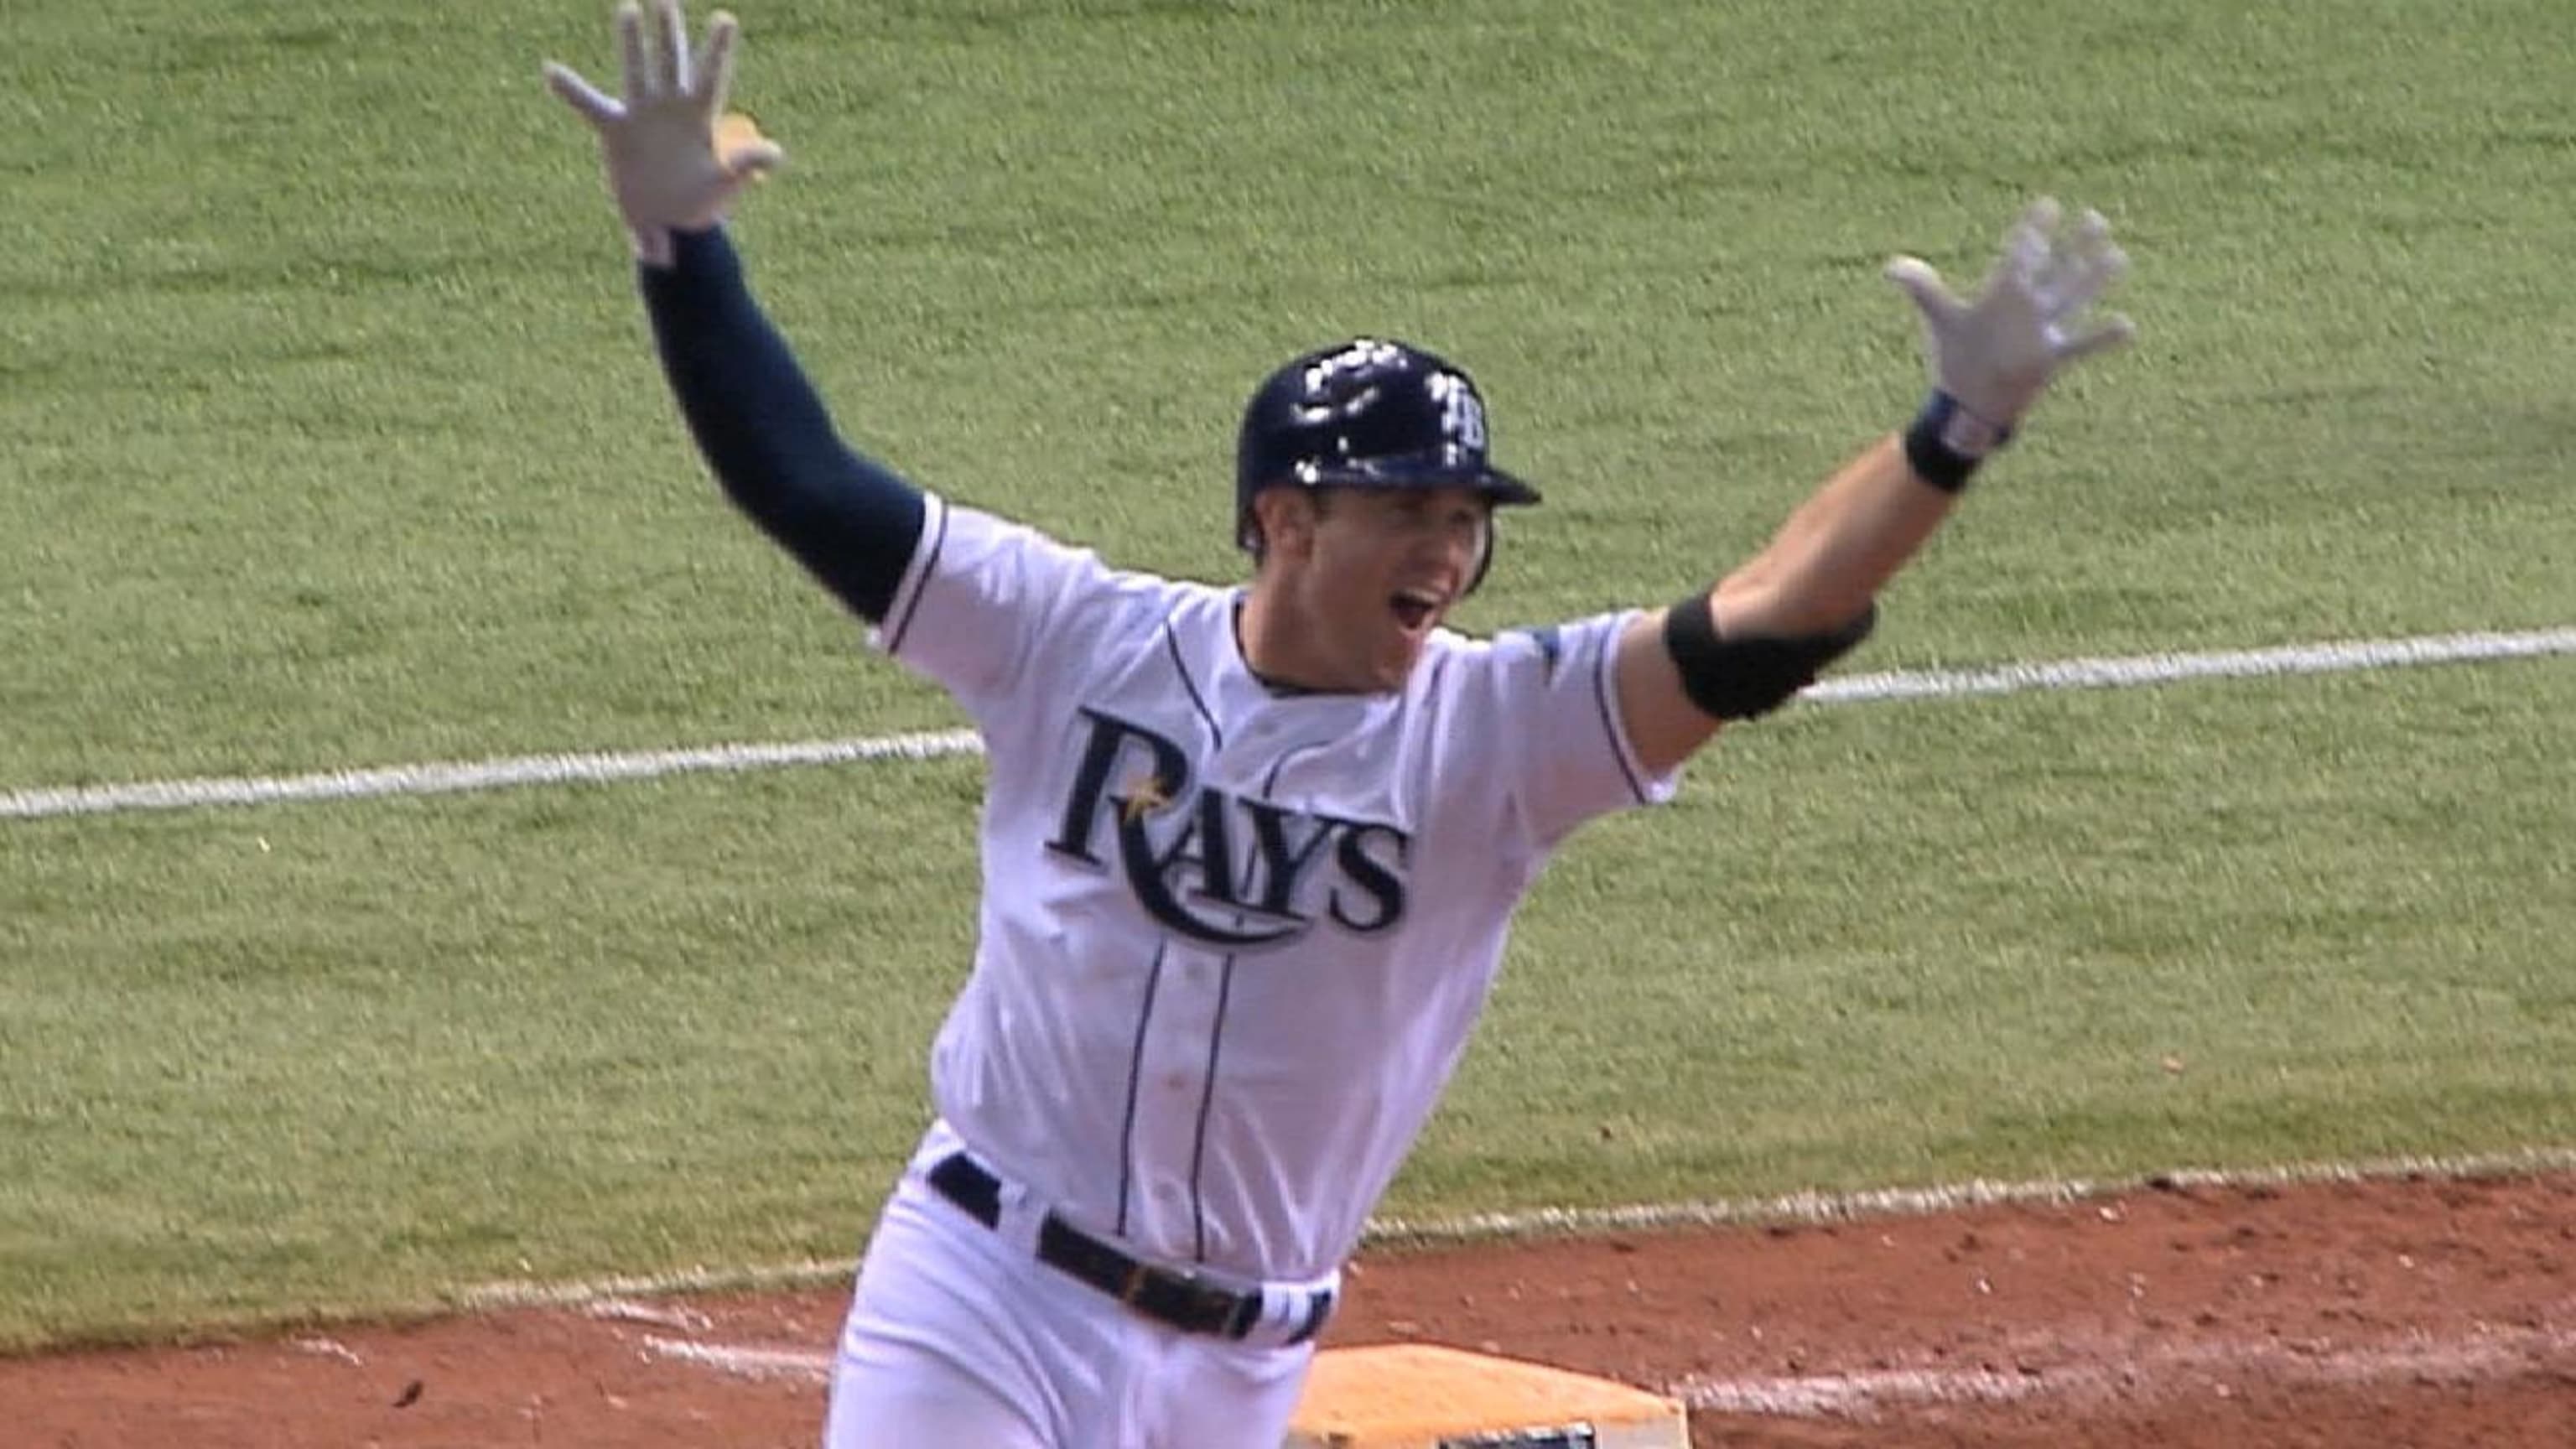 Evan Longoria reflects on legacy with Rays